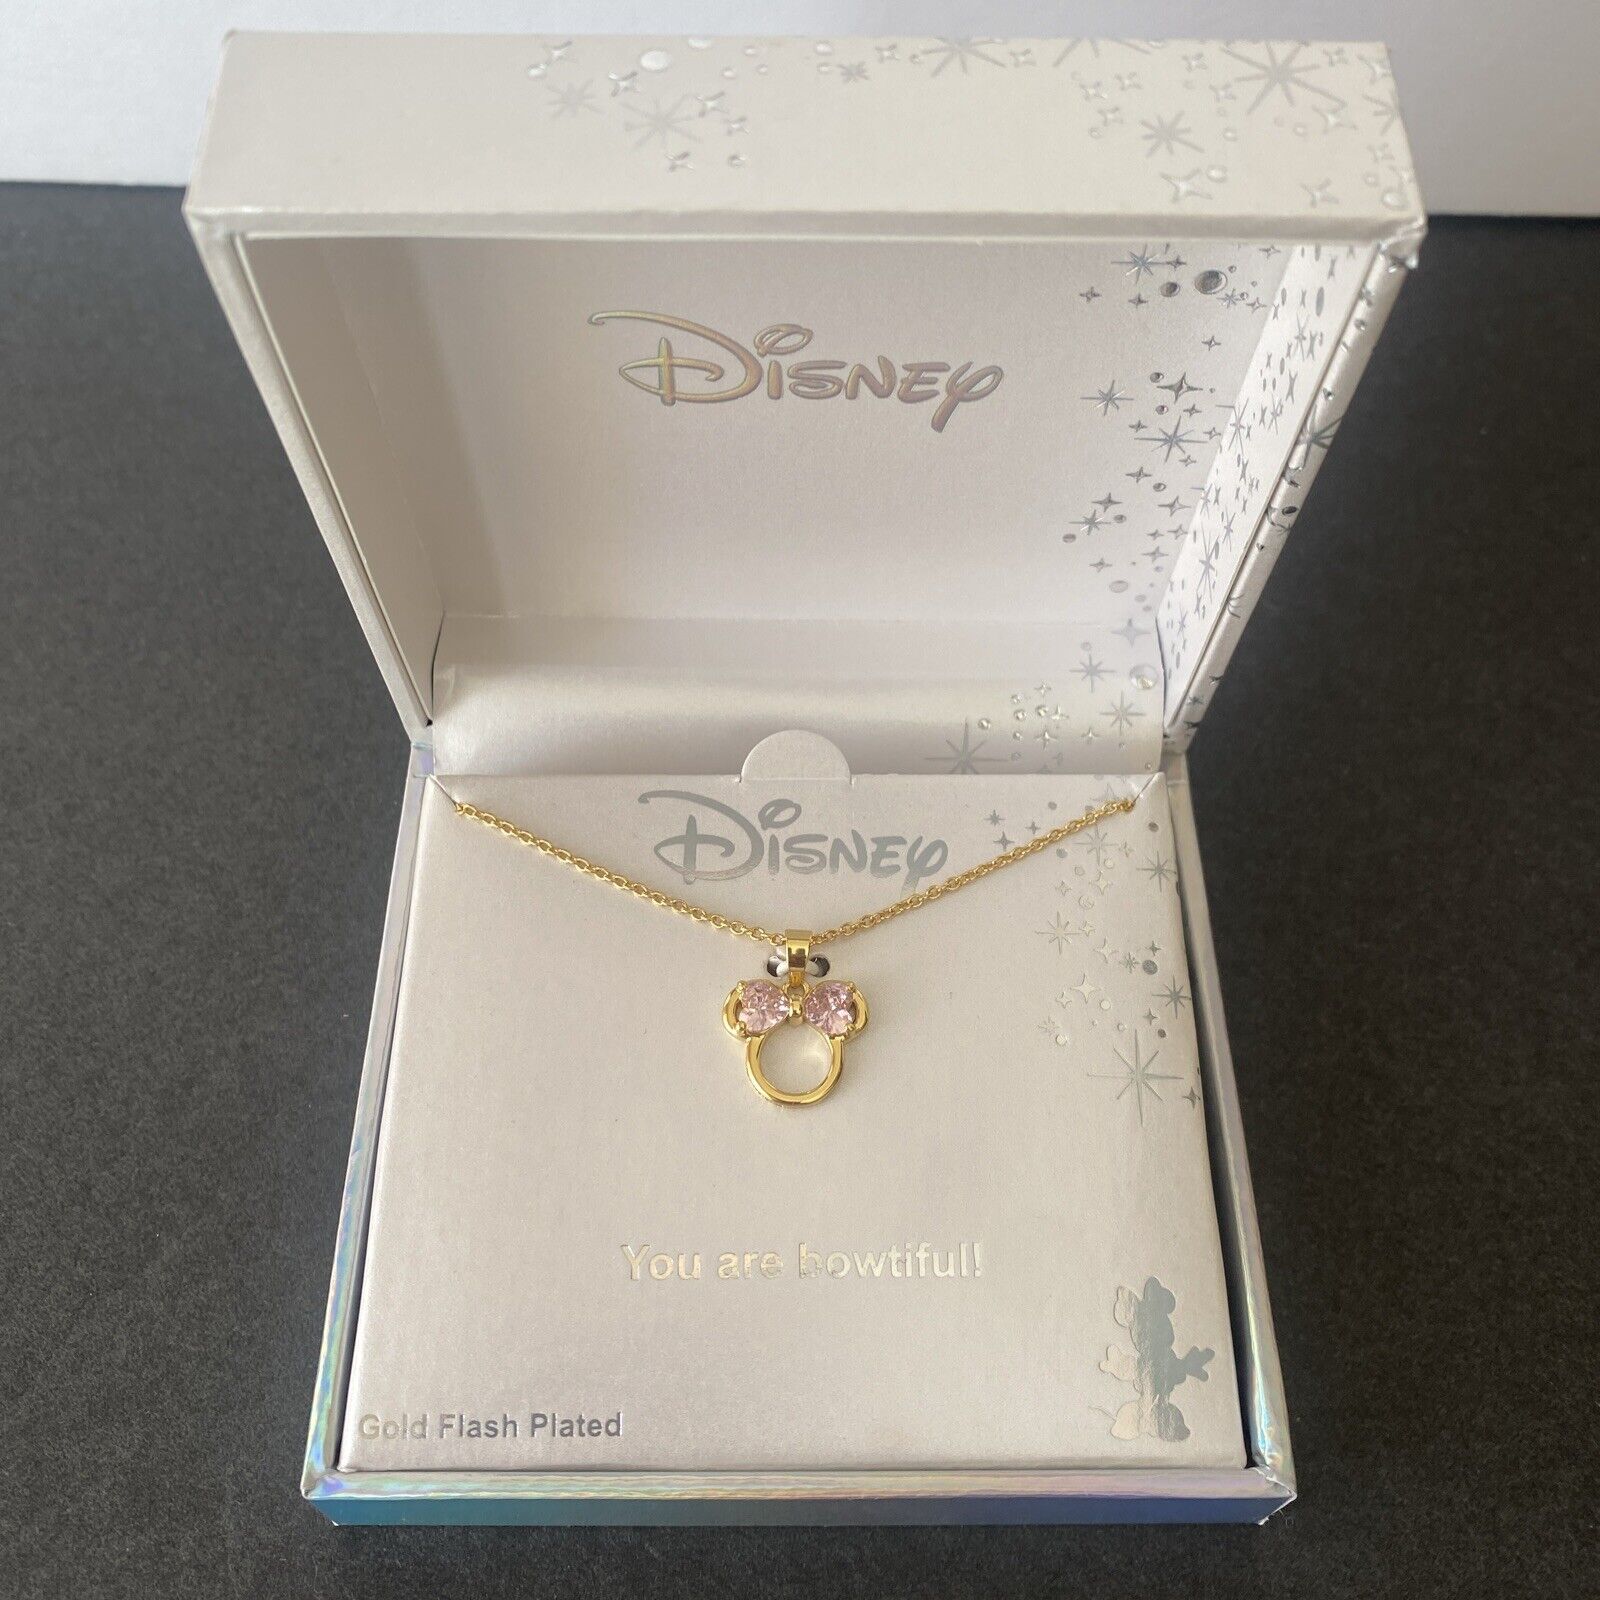 New Disney Necklace Minnie Mouse Bowtiful Gold Flash Plated Pink Stone